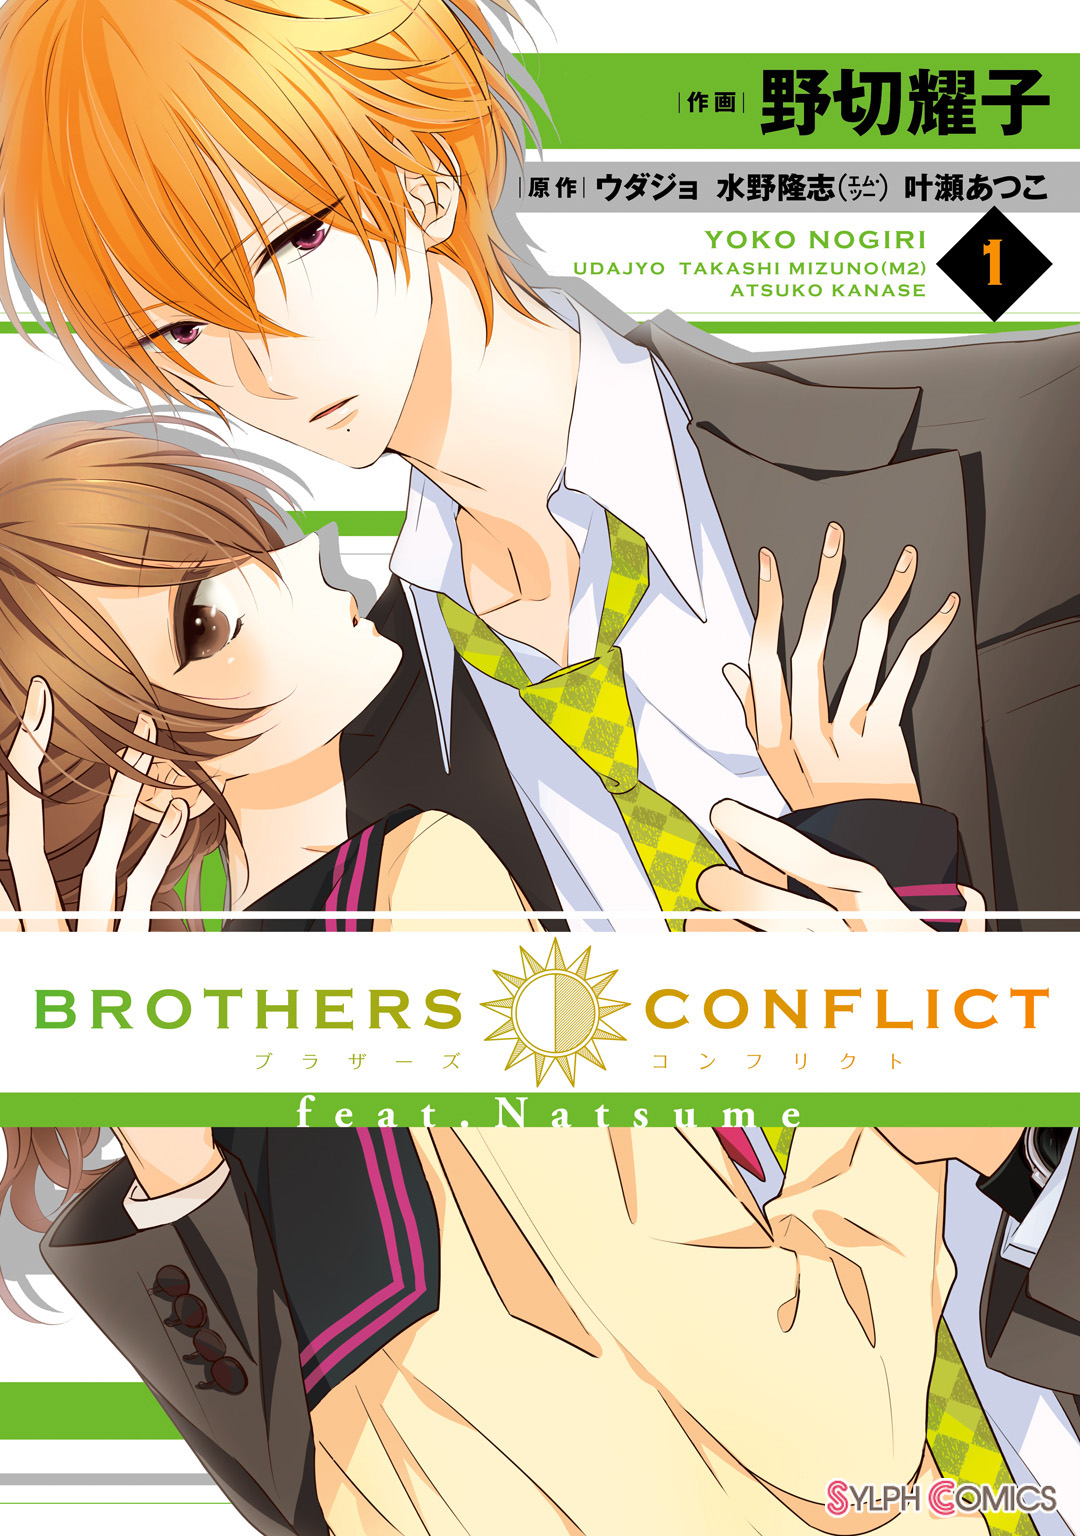 BROTHERS CONFLICT feat.Natsume(1) | ブックライブ